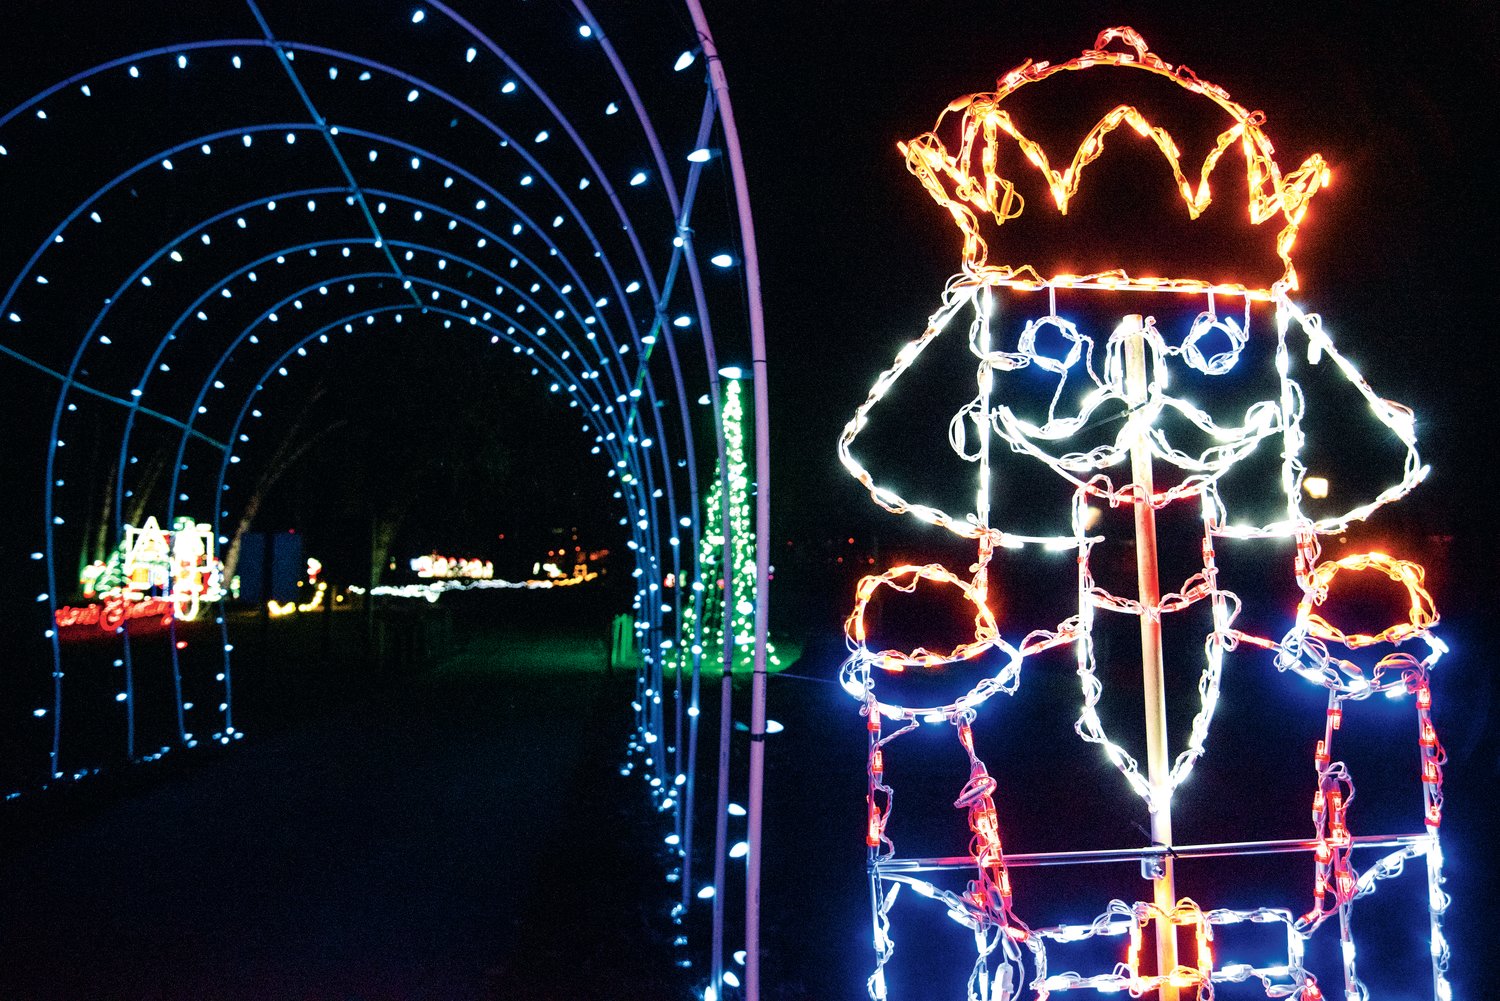 A nutcracker stands guard illuminated by Christmas lights near the entrance of a lighted tunnel at Borst Park in Centralia.